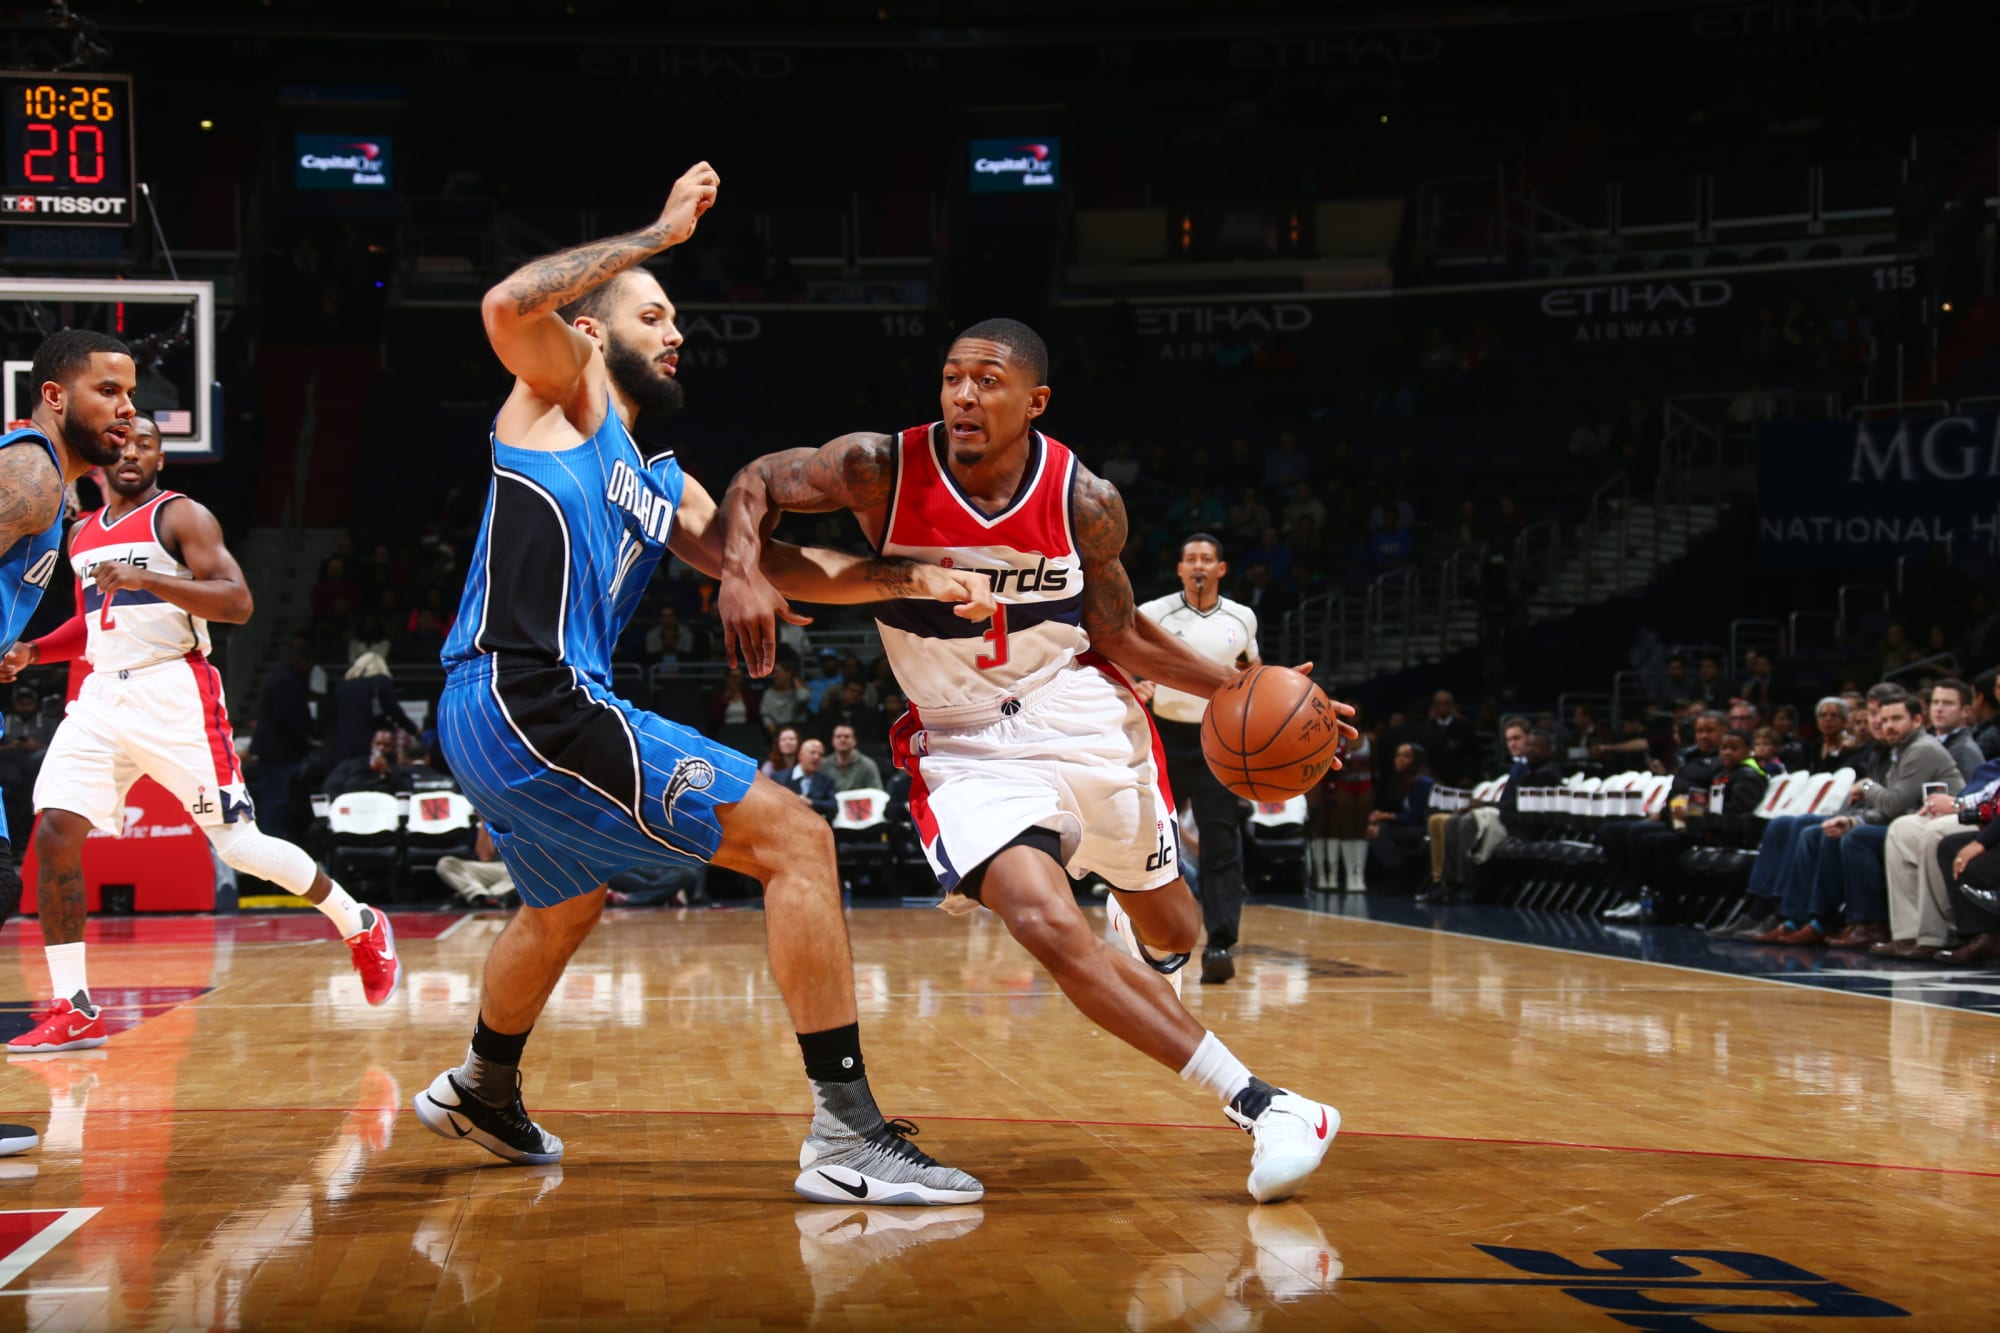 Washington Wizards take on the Orlando Magic in a must win game